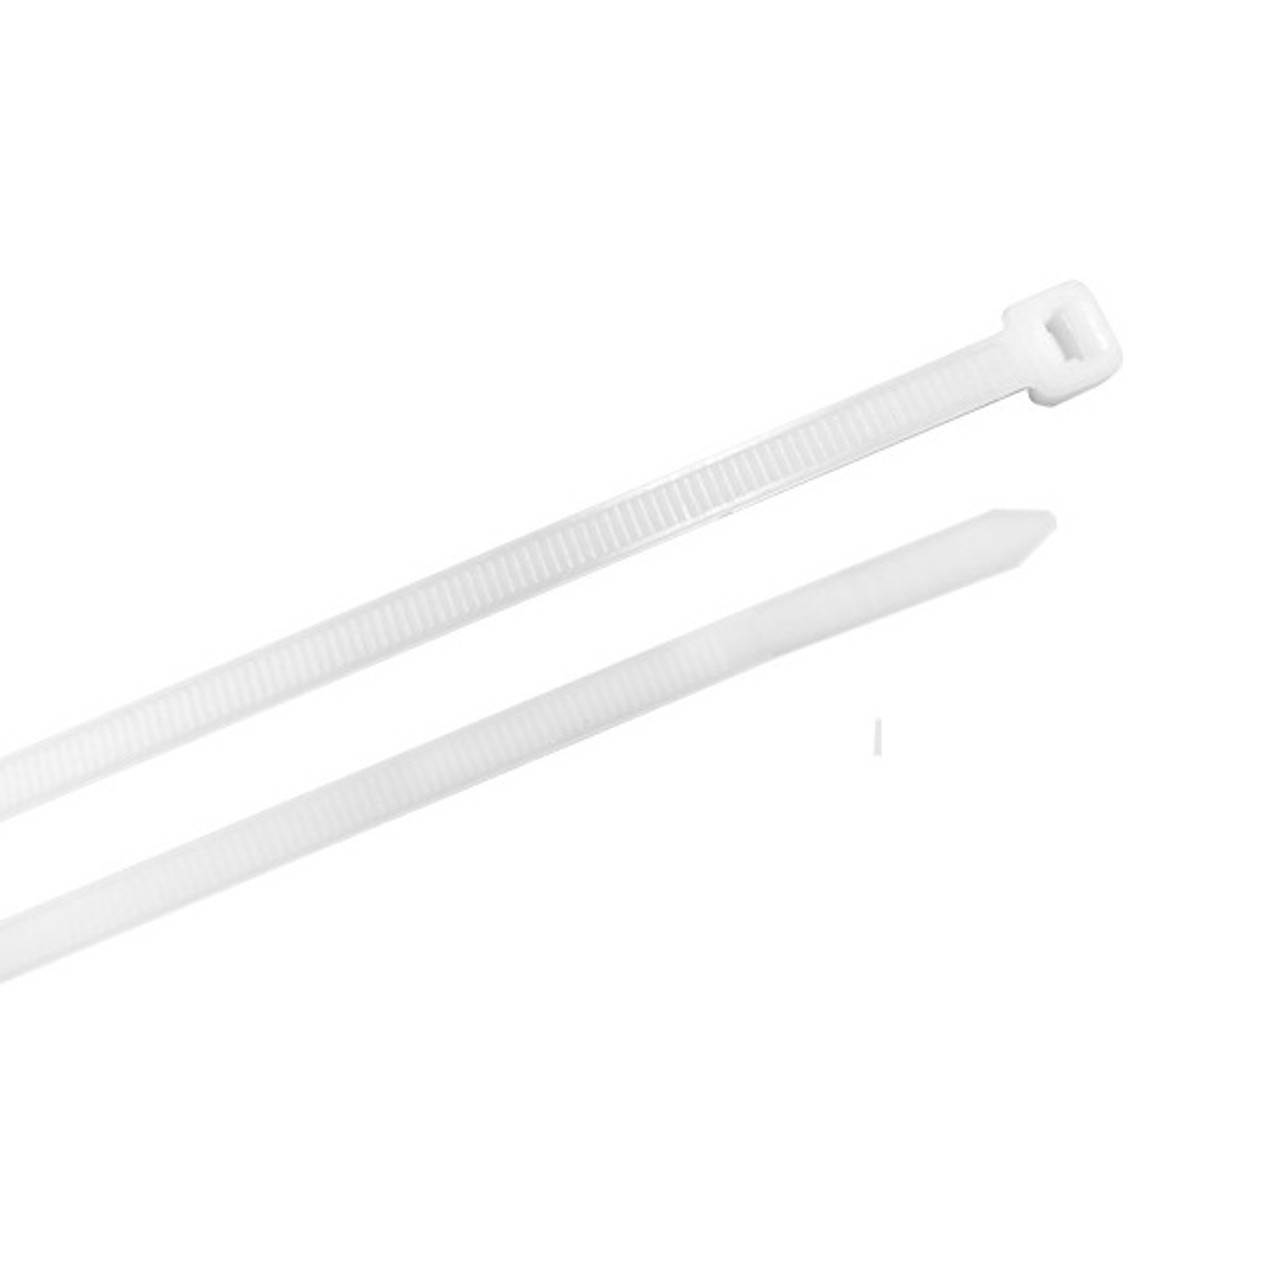 Stanley 14-Inch Multi-Purpose Cable Ties - White (Pack of 30)